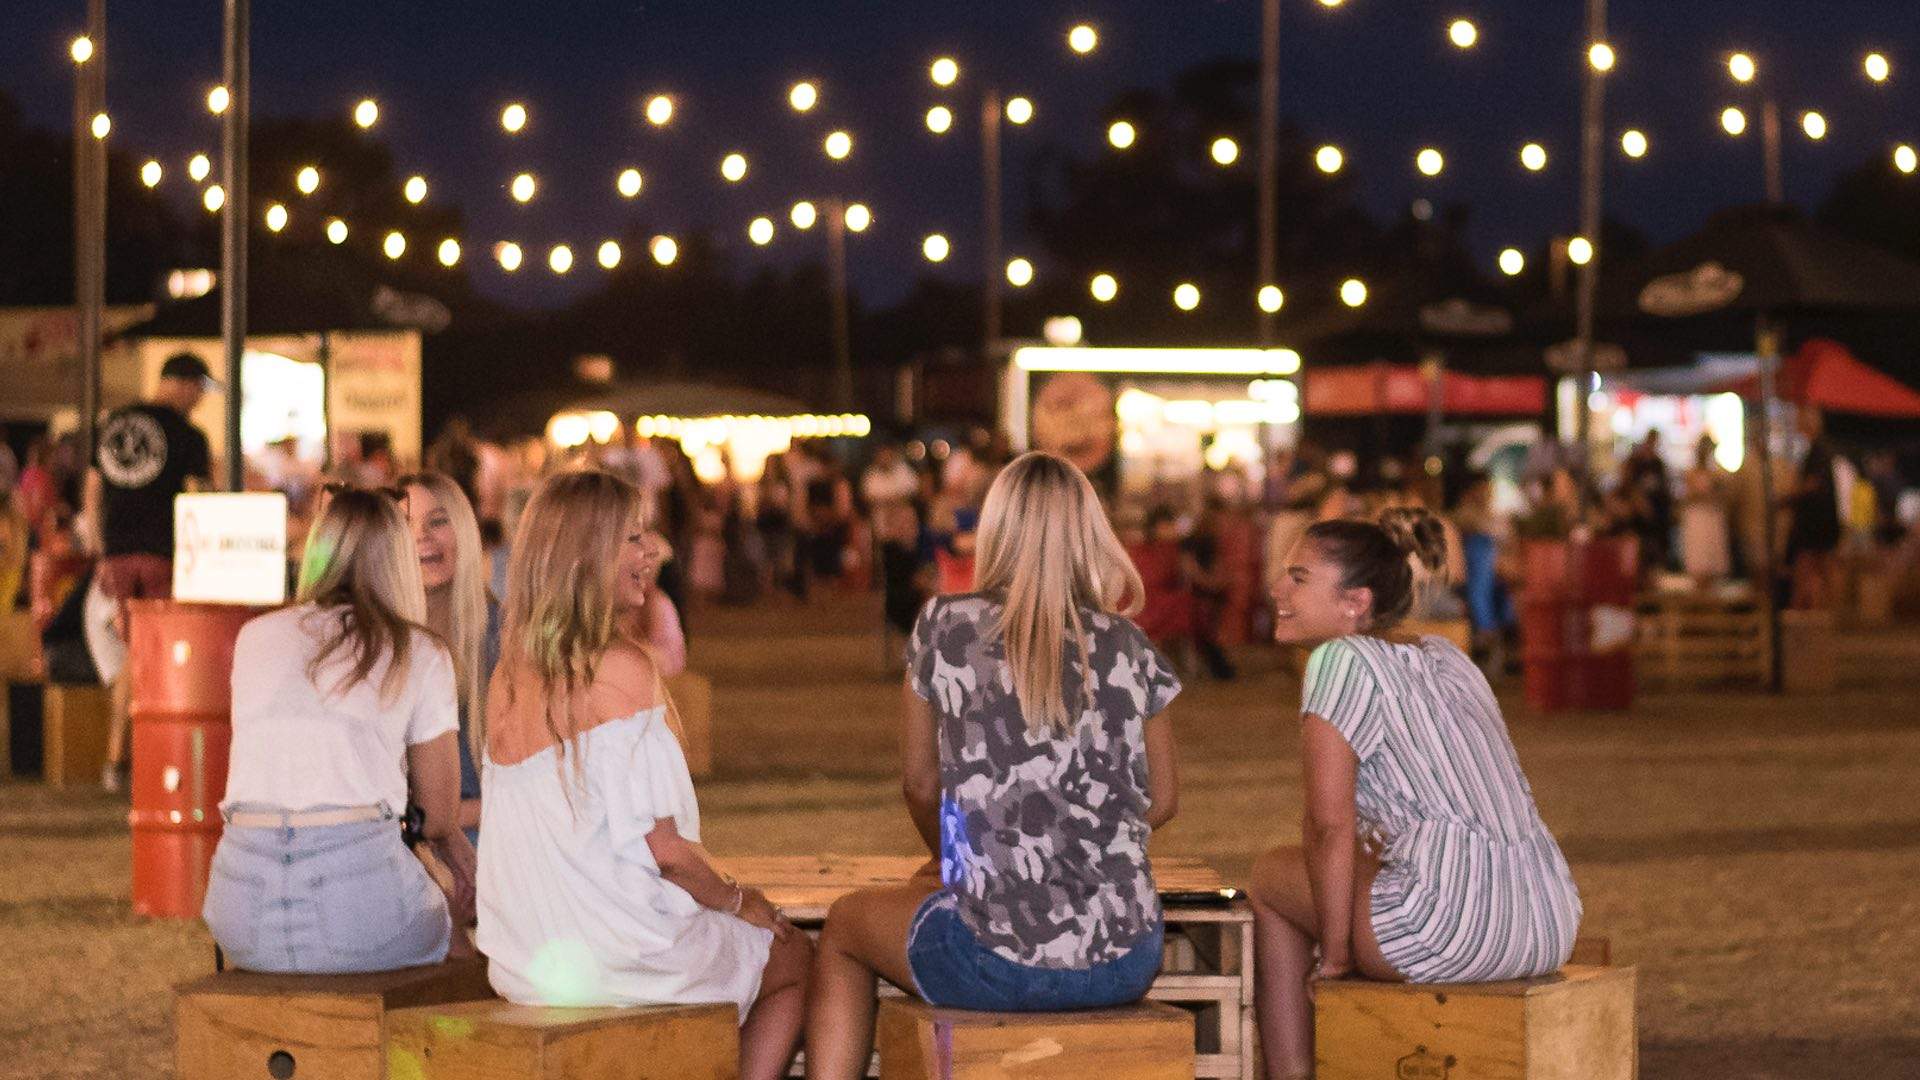 The Food Truck Festival 2018